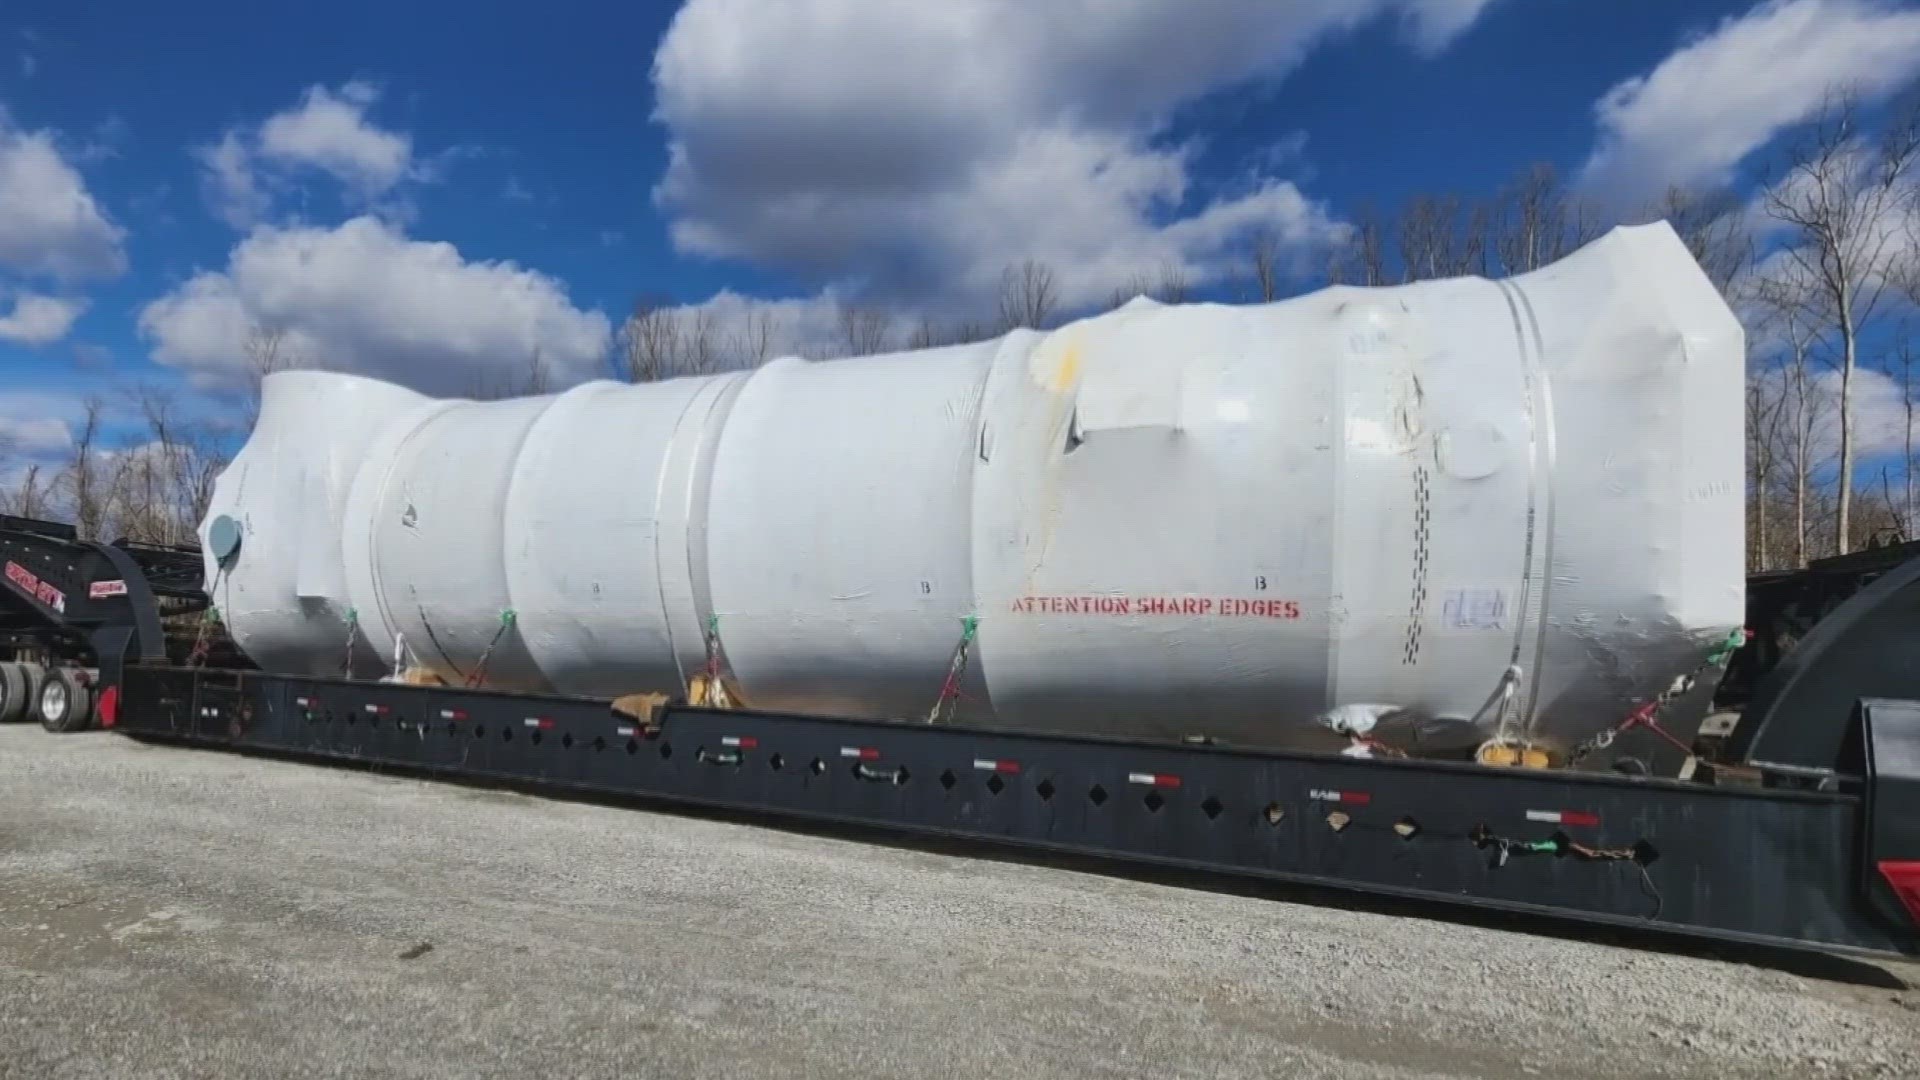 The first of at least two dozen “super loads” is scheduled to hit the road Wednesday morning.